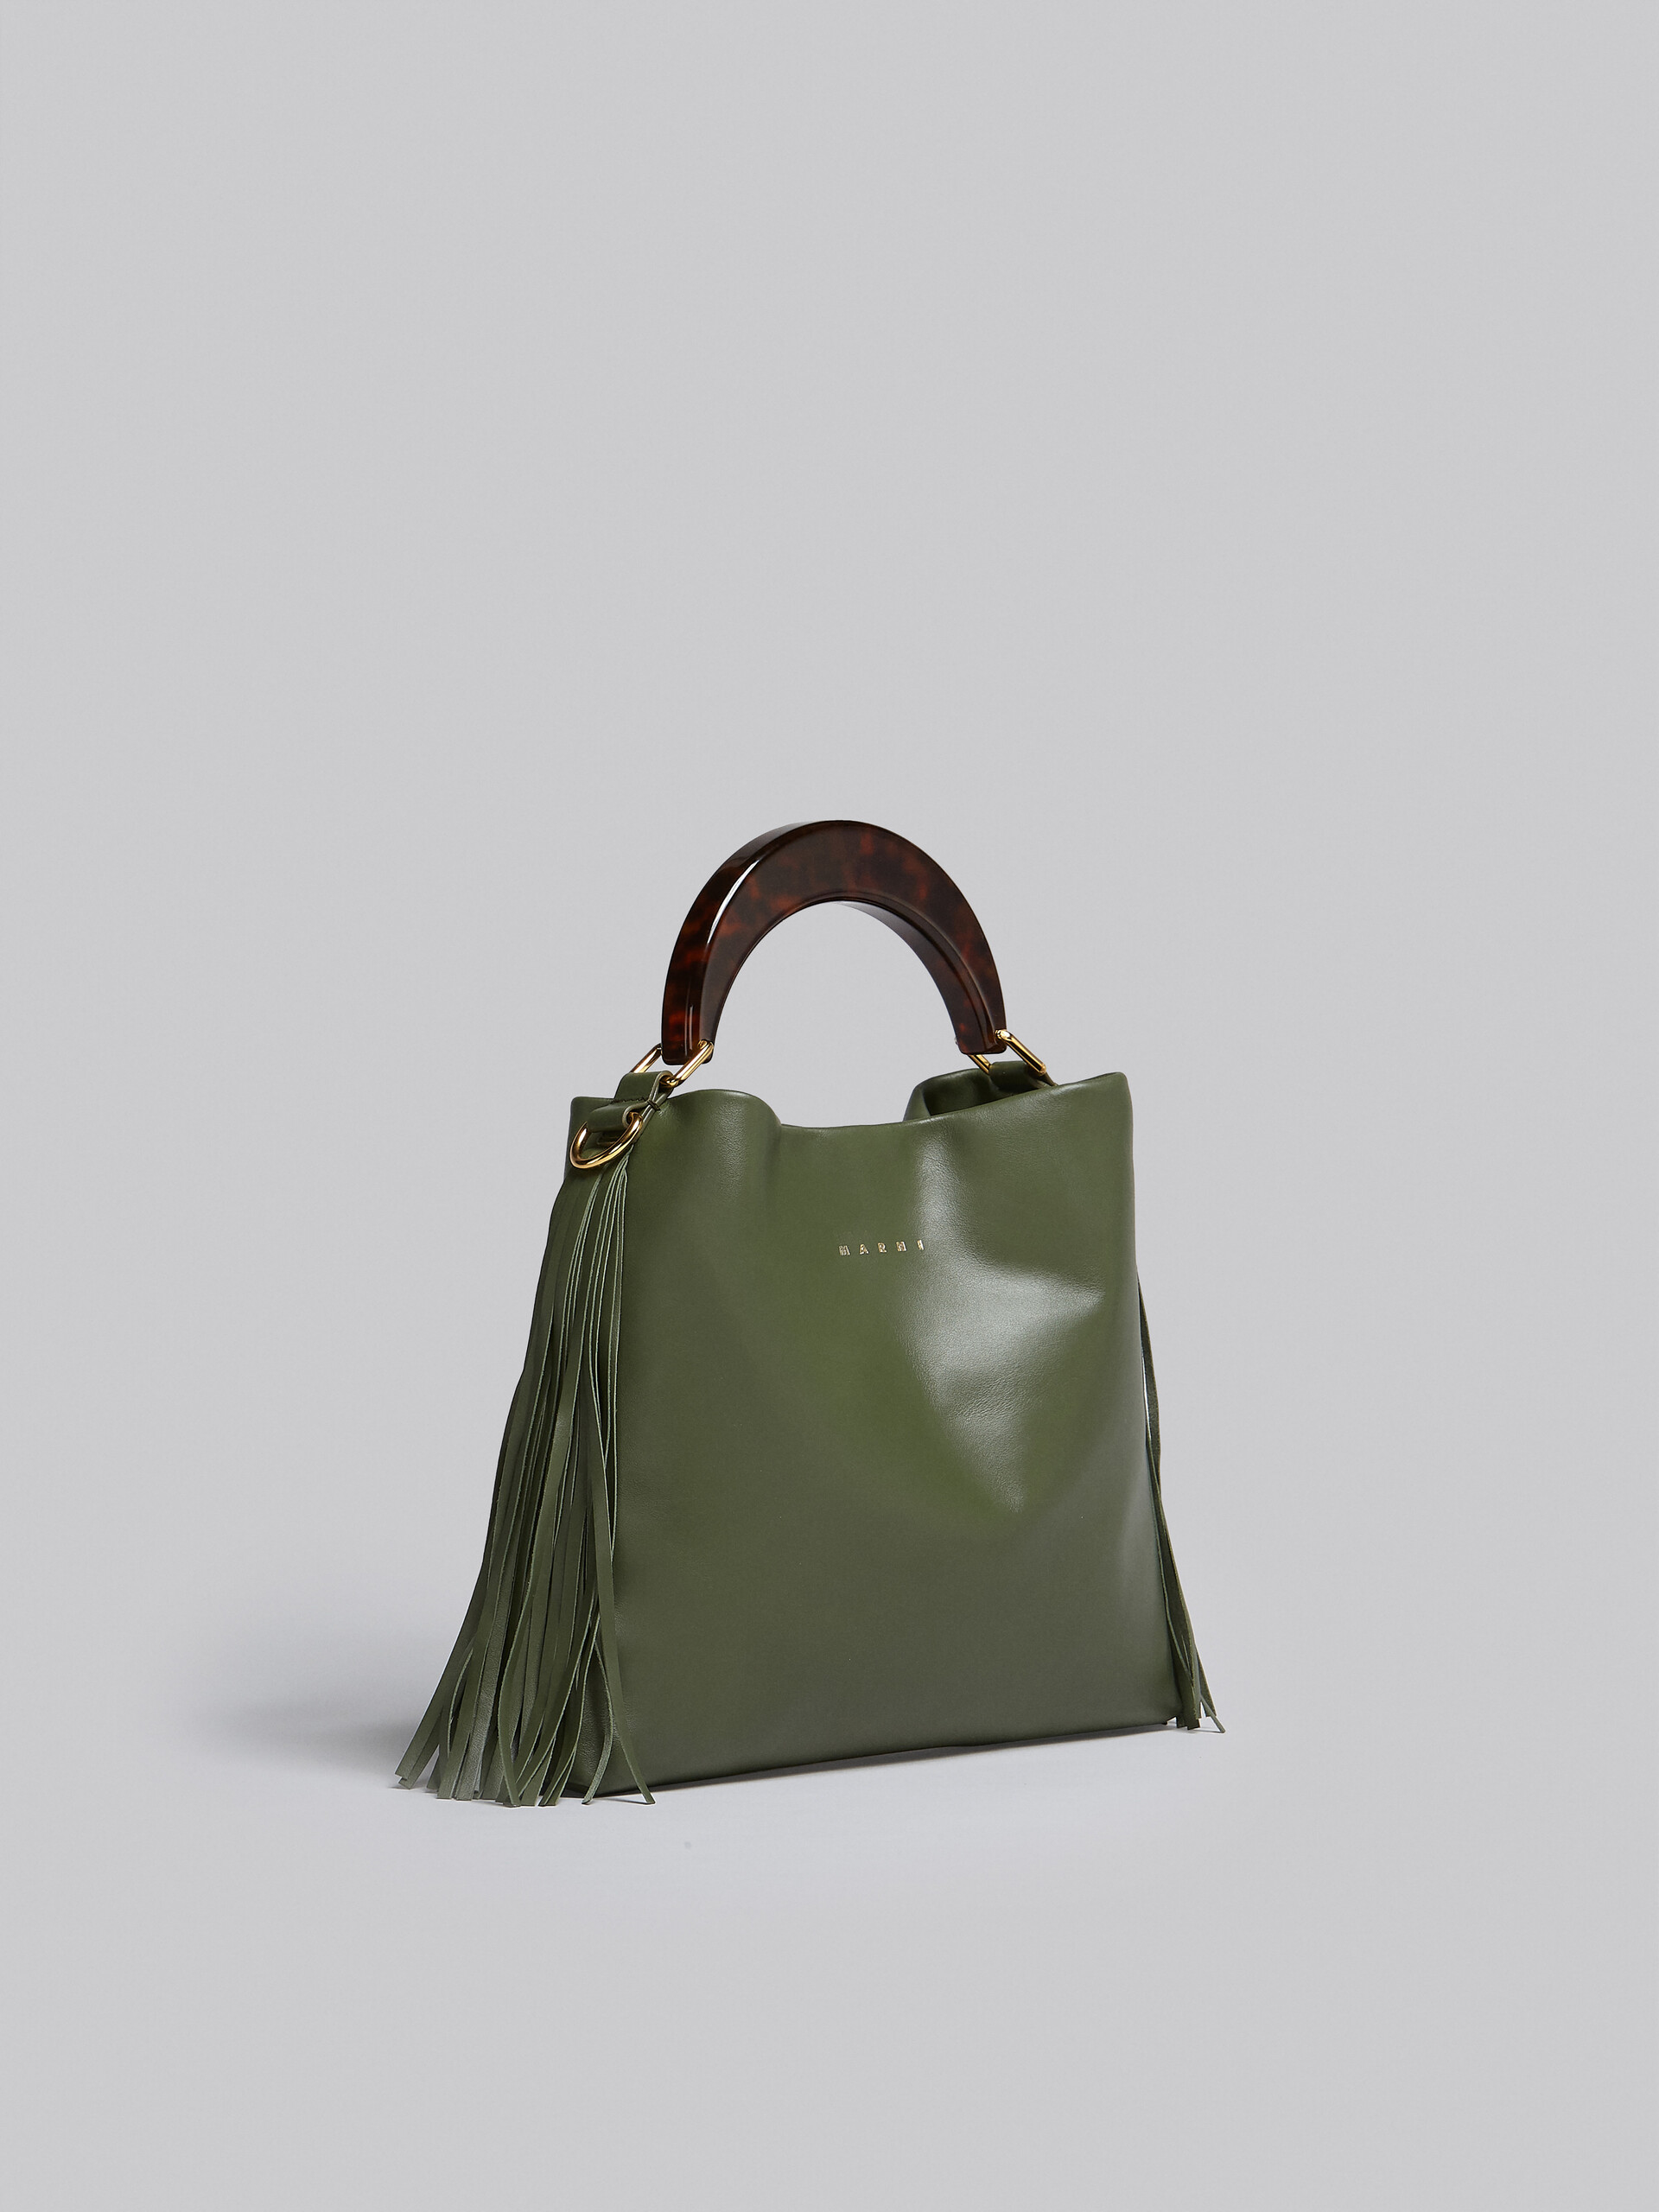 Venice Small Bag in green leather with fringes - Shoulder Bags - Image 5